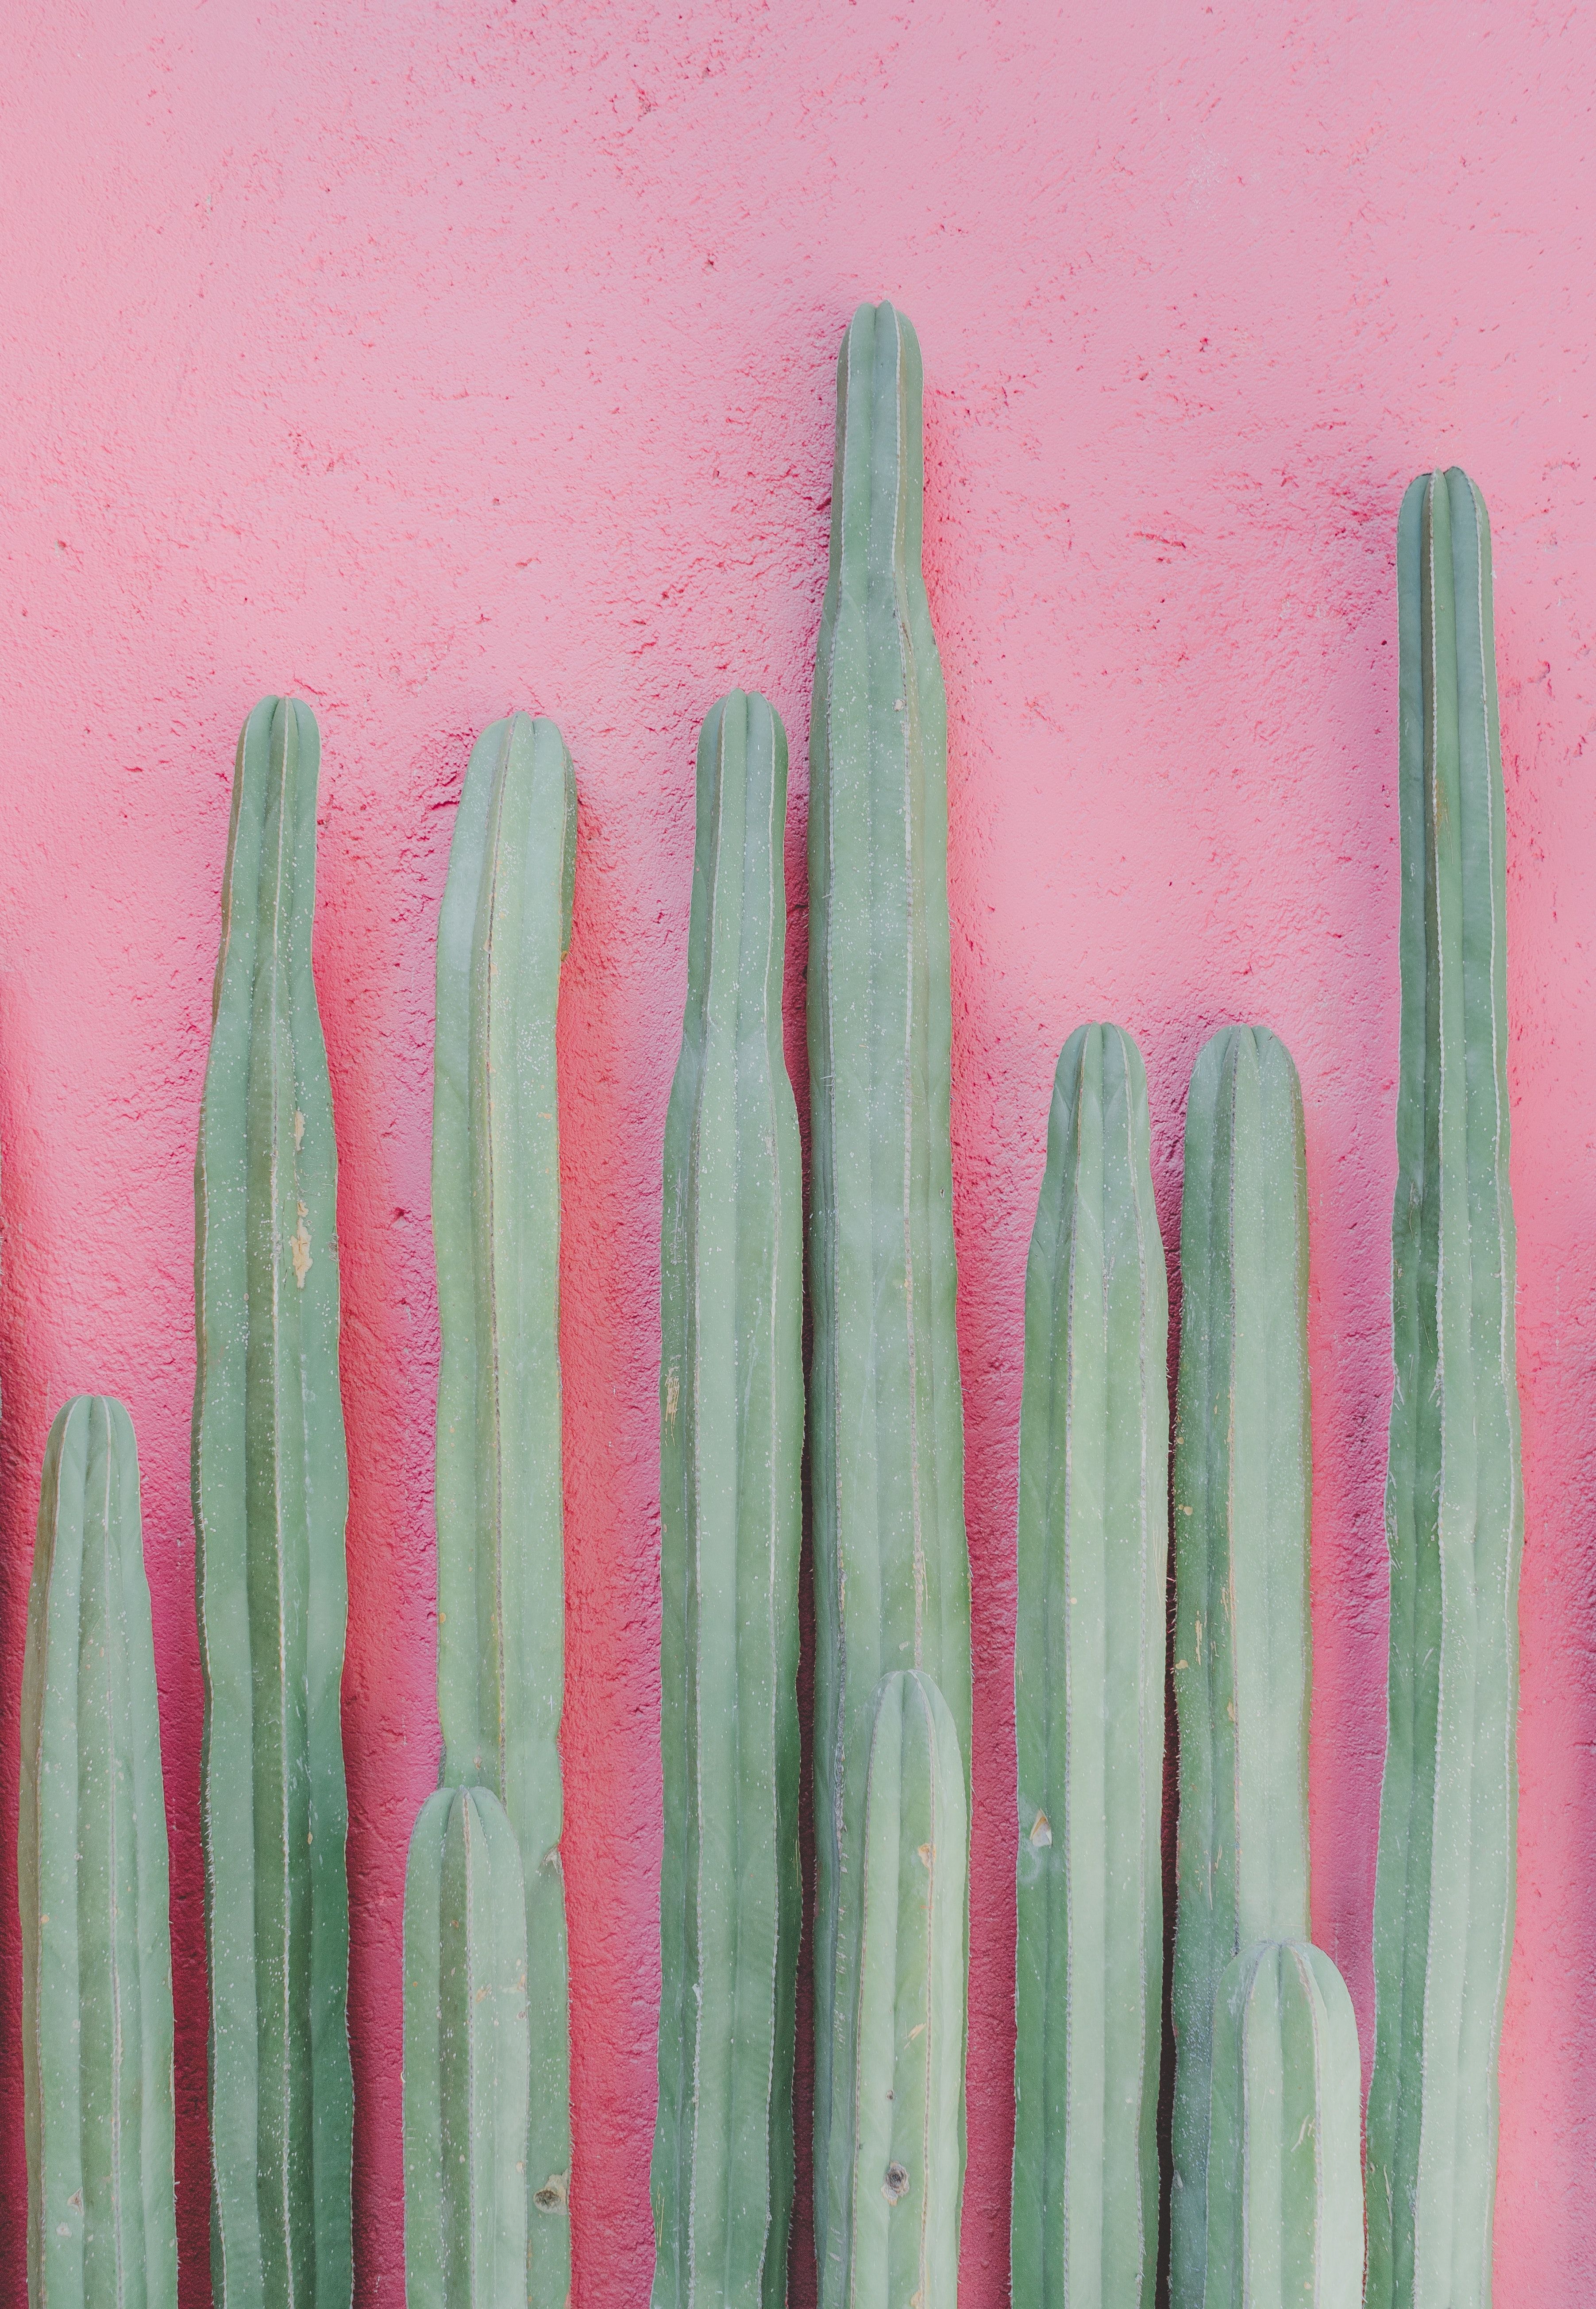 A row of green cactus against a pink wall - Cactus